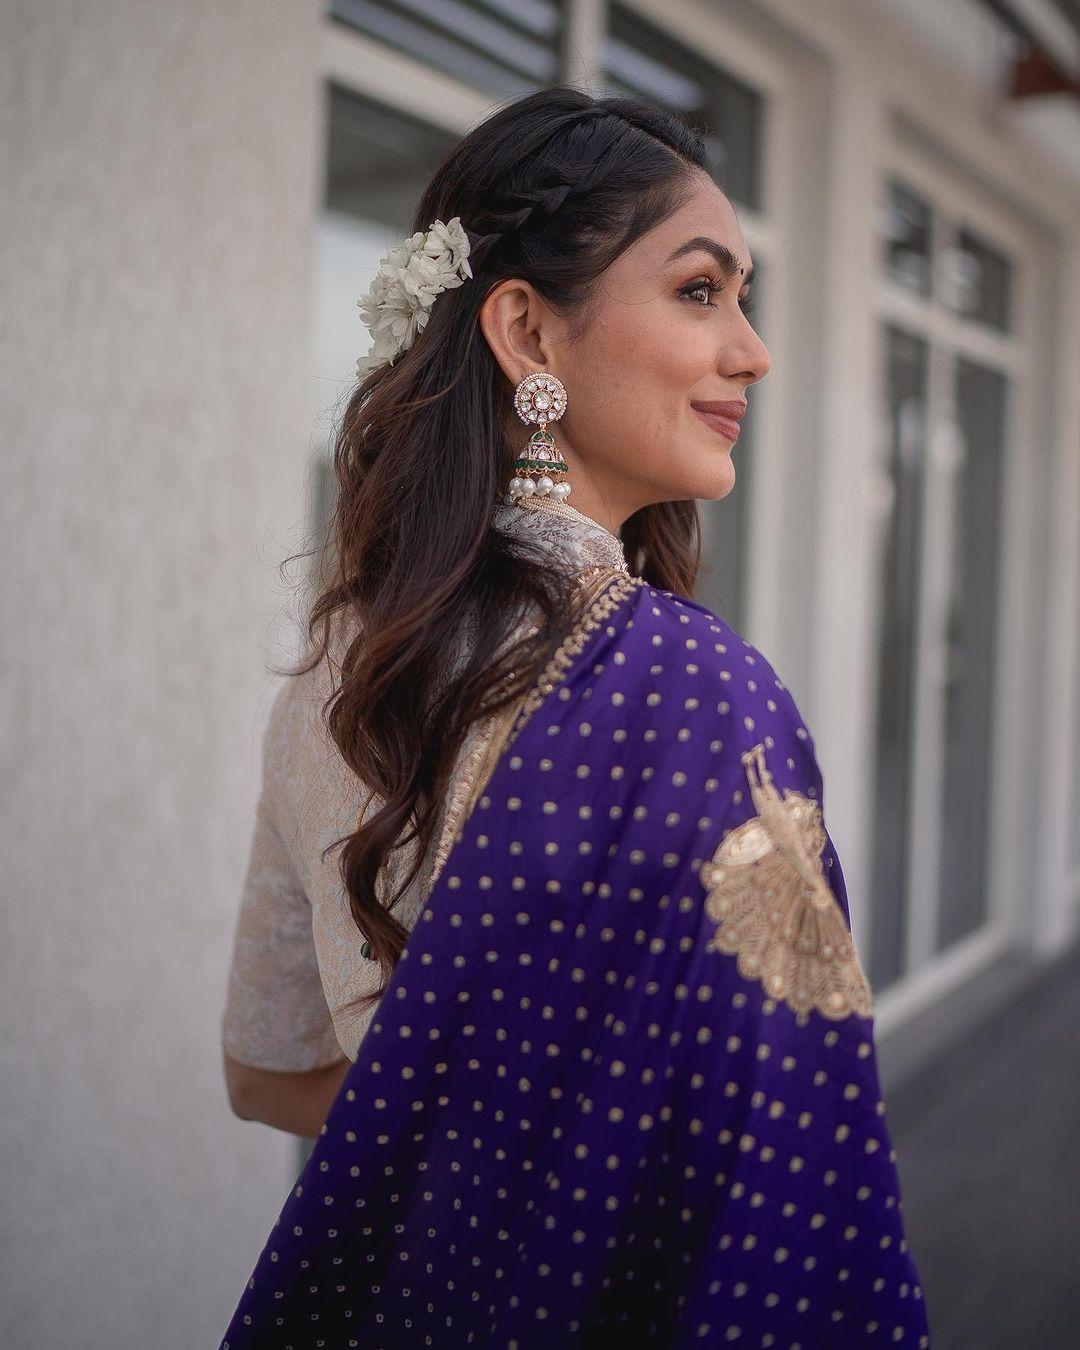 Mrunal shines as a beacon of style in a pastel brocade gown from Raw Mango. This ensemble flawlessly merges tradition and modernity, featuring palazzo pants and a short-sleeved kurti with a daring neckline.